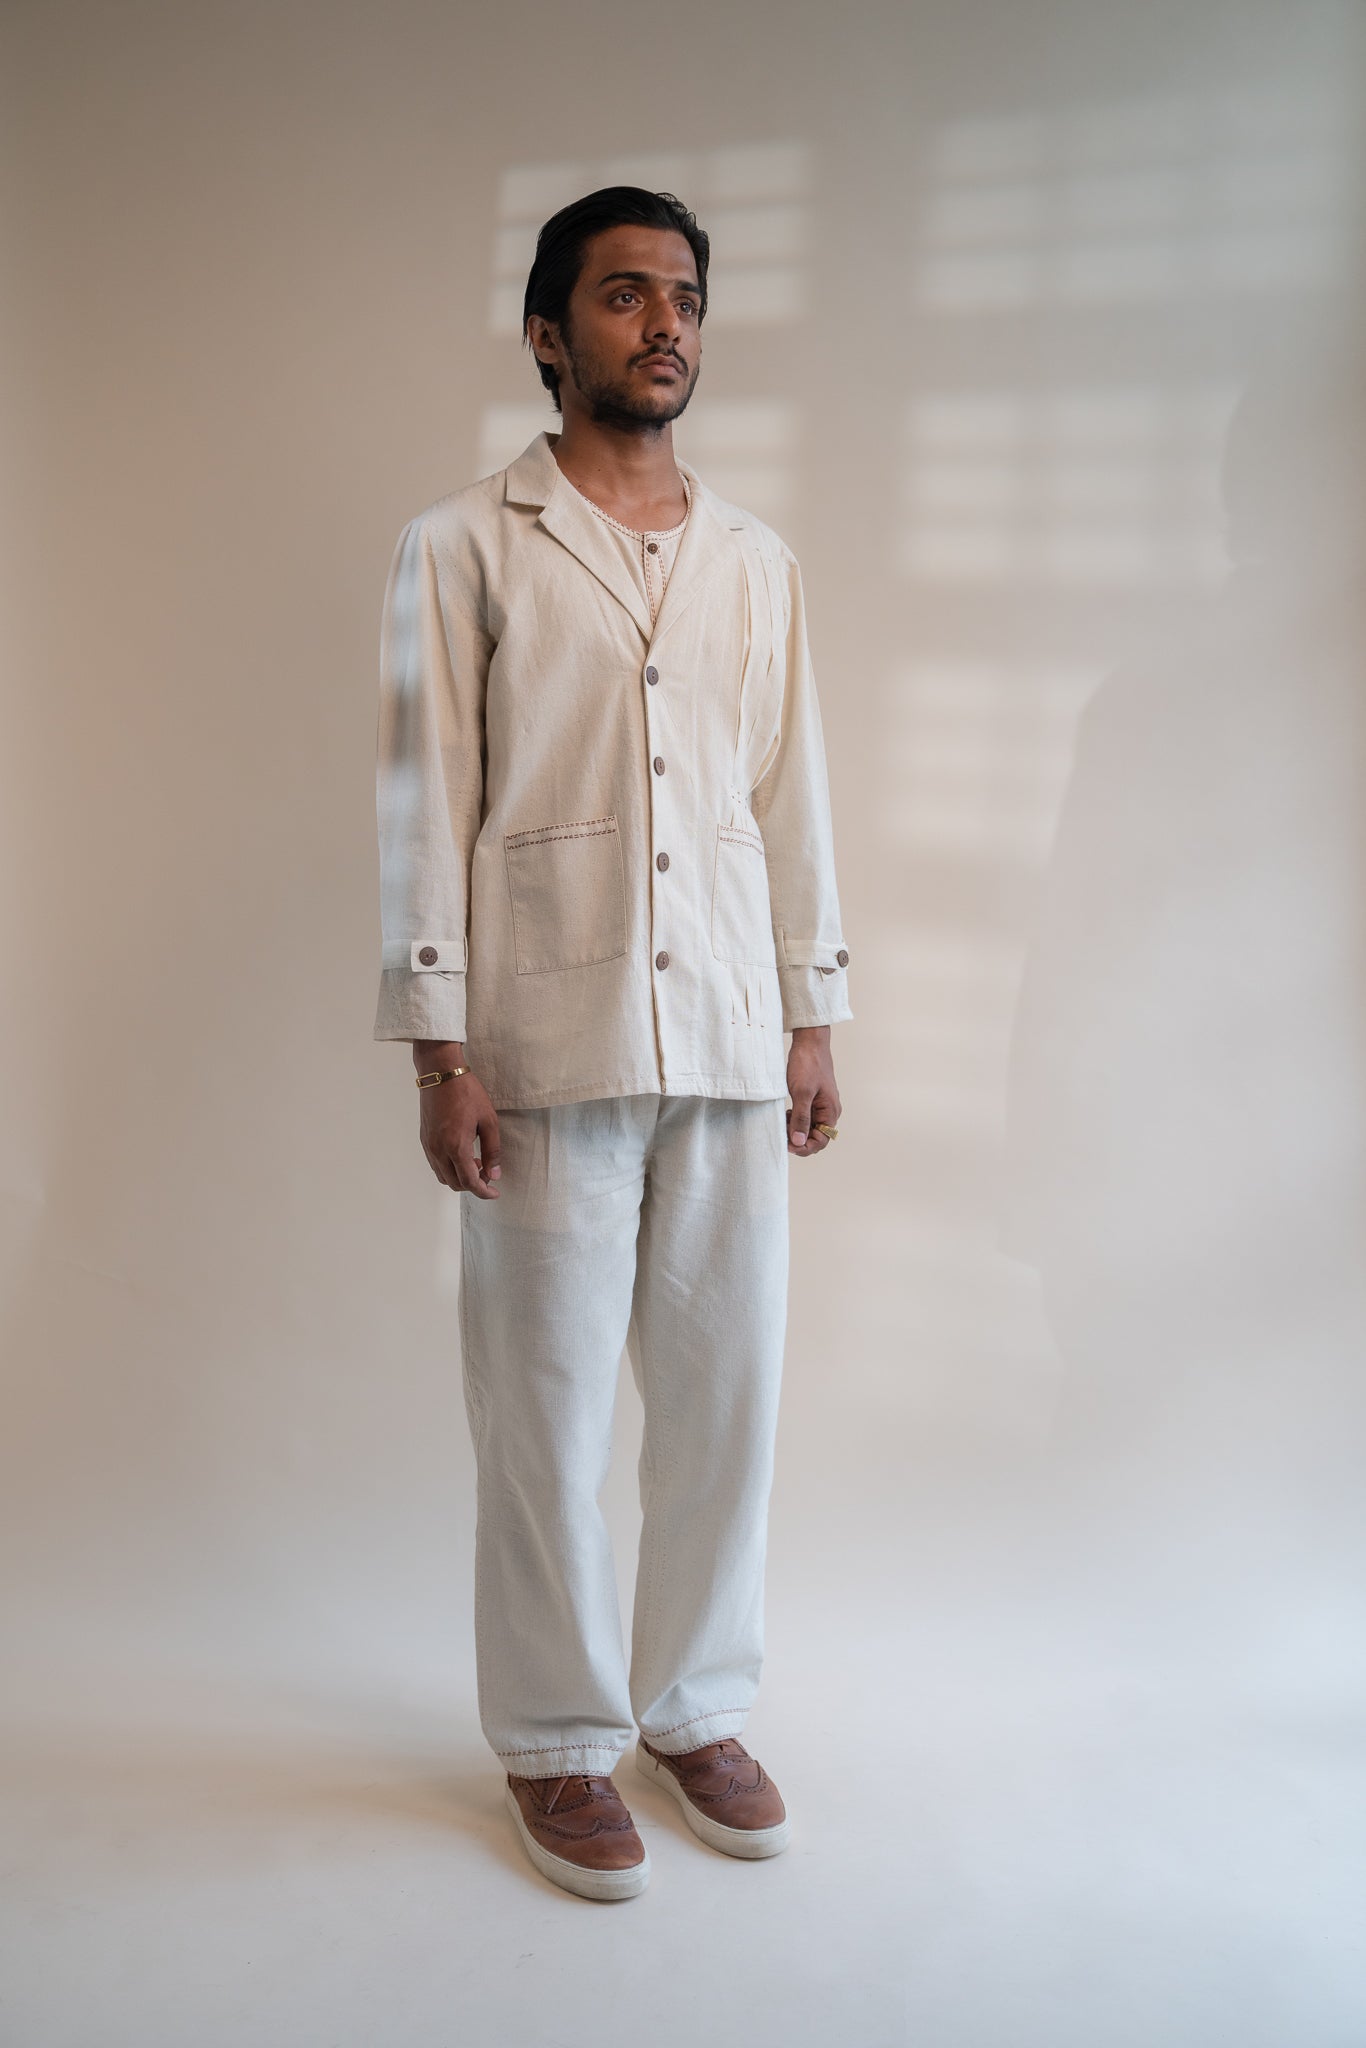 Dawning Unisex Pleated Blazer at Kamakhyaa by Lafaani. This item is Beige, Blazers, Casual Wear, Denim, Embroidered, For Him, Hand Woven Cotton, Kora, Mens Overlay, Menswear, Natural, Regular Fit, Unisex